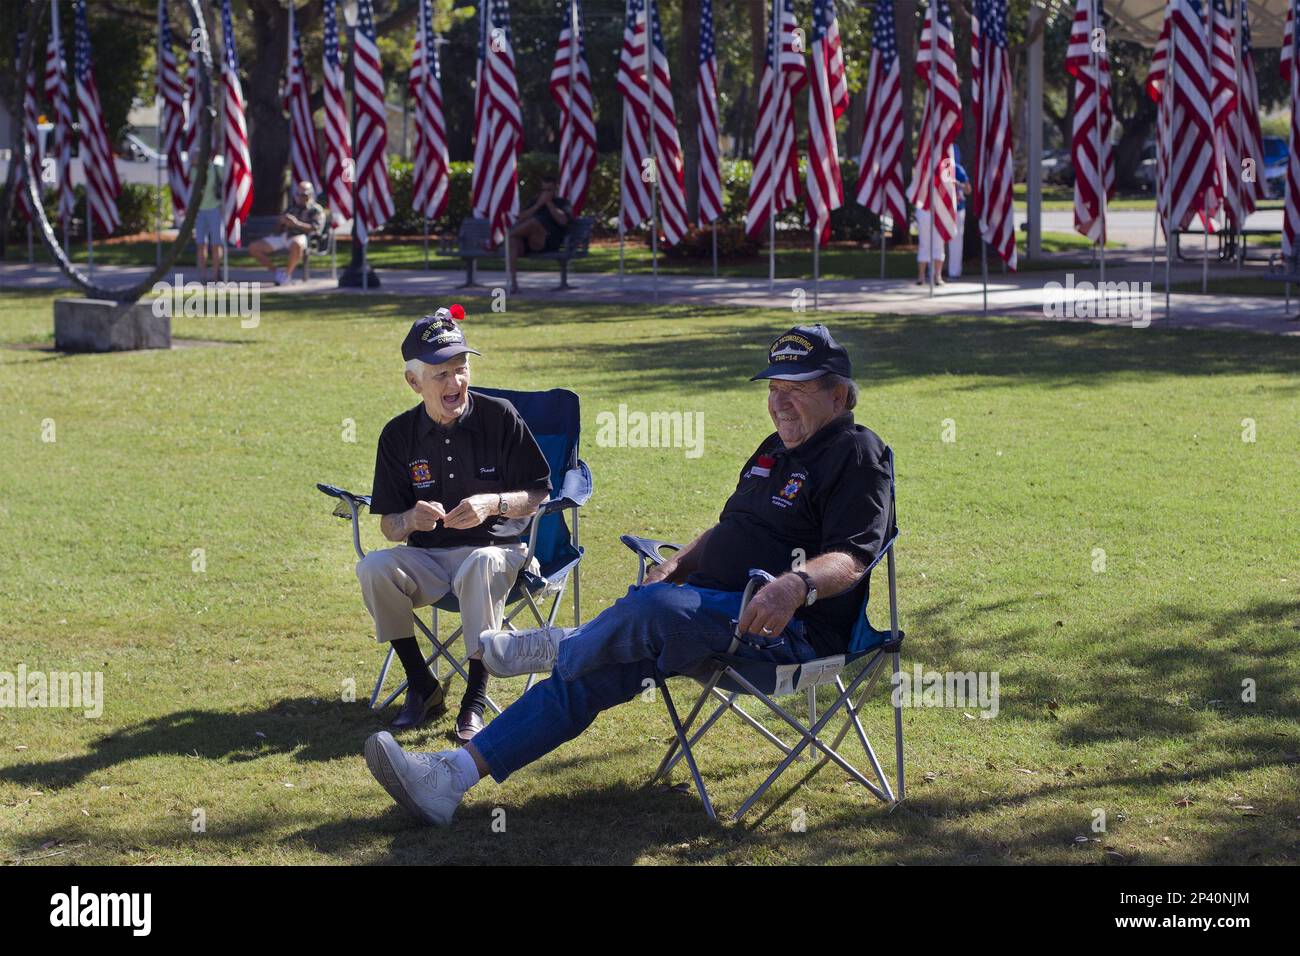 Frank Steinke, left, and Max Zillig talk before the start of the Bonita Springs' Veterans Day memorial service at Riverside Park in Bonita Springs, Fla. on Tuesday, Nov. 11, 2014. The friends met as shipmates on the USS Ticonderoga in 1955. "We traveled around the world together," said Steinke. "The ship almost broke in half." (AP Photo/Naples Daily News, Carolina Hidalgo) Stock Photo